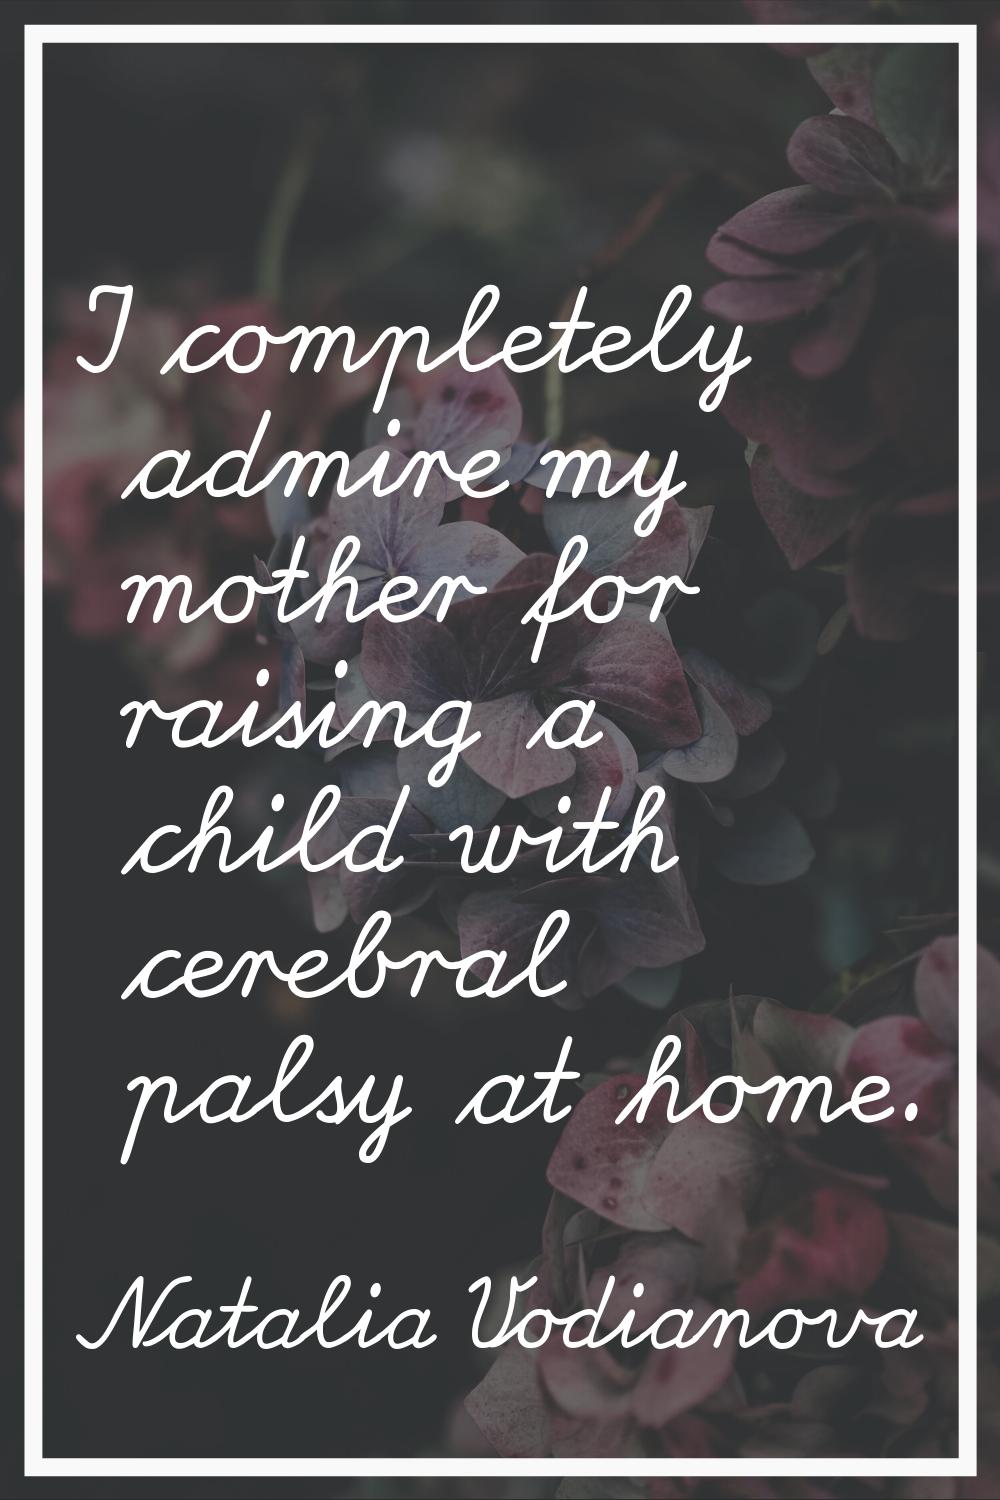 I completely admire my mother for raising a child with cerebral palsy at home.